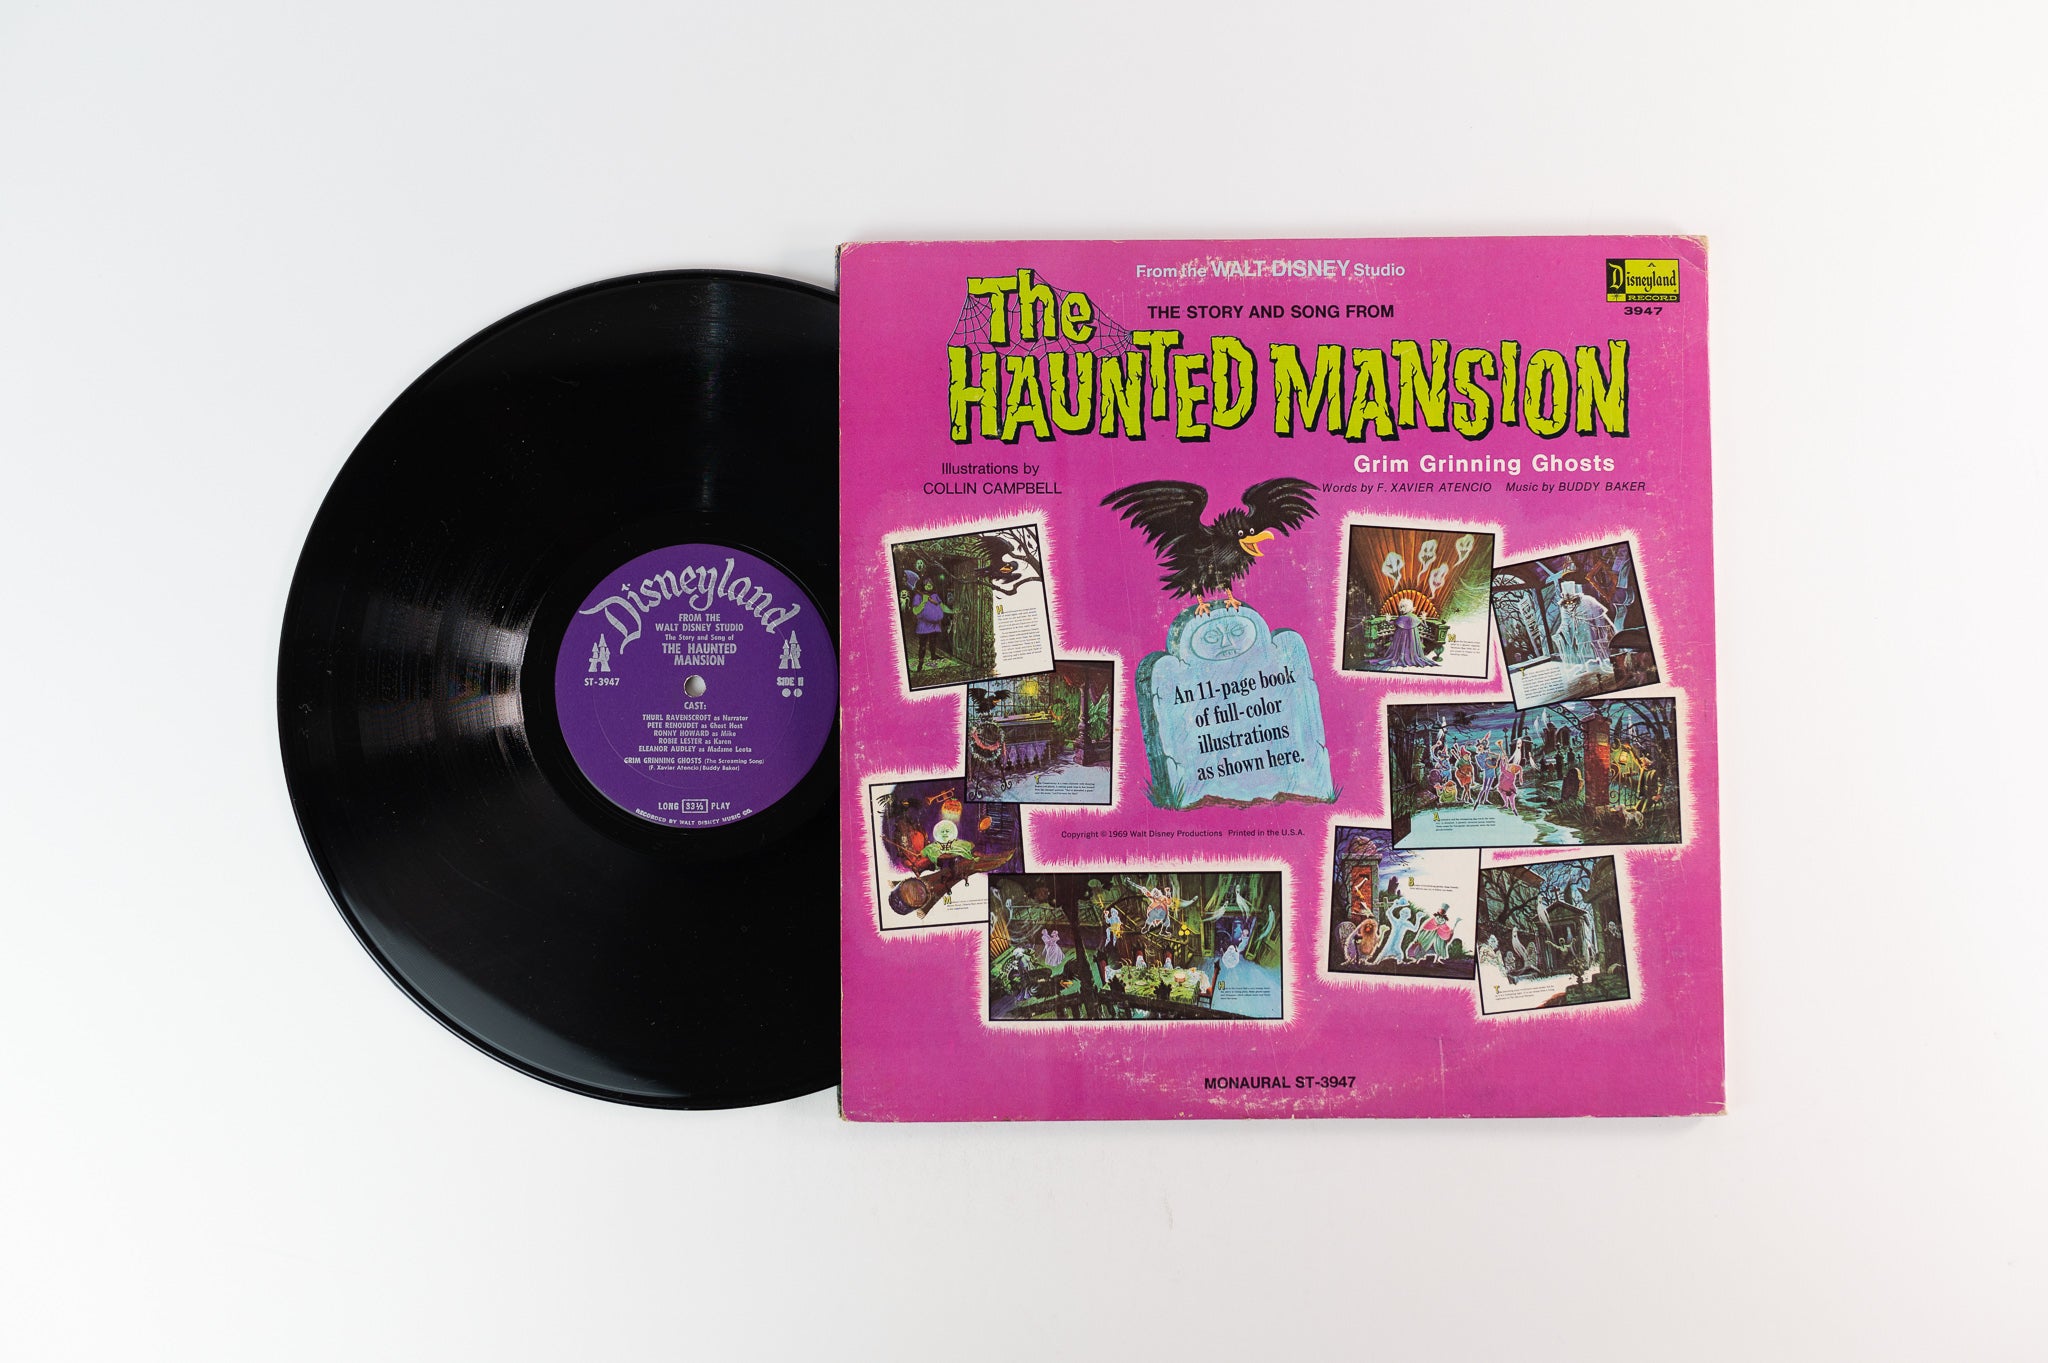 Walt Disney Studio - The Story And Song From The Haunted Mansion on Disneyland Mono